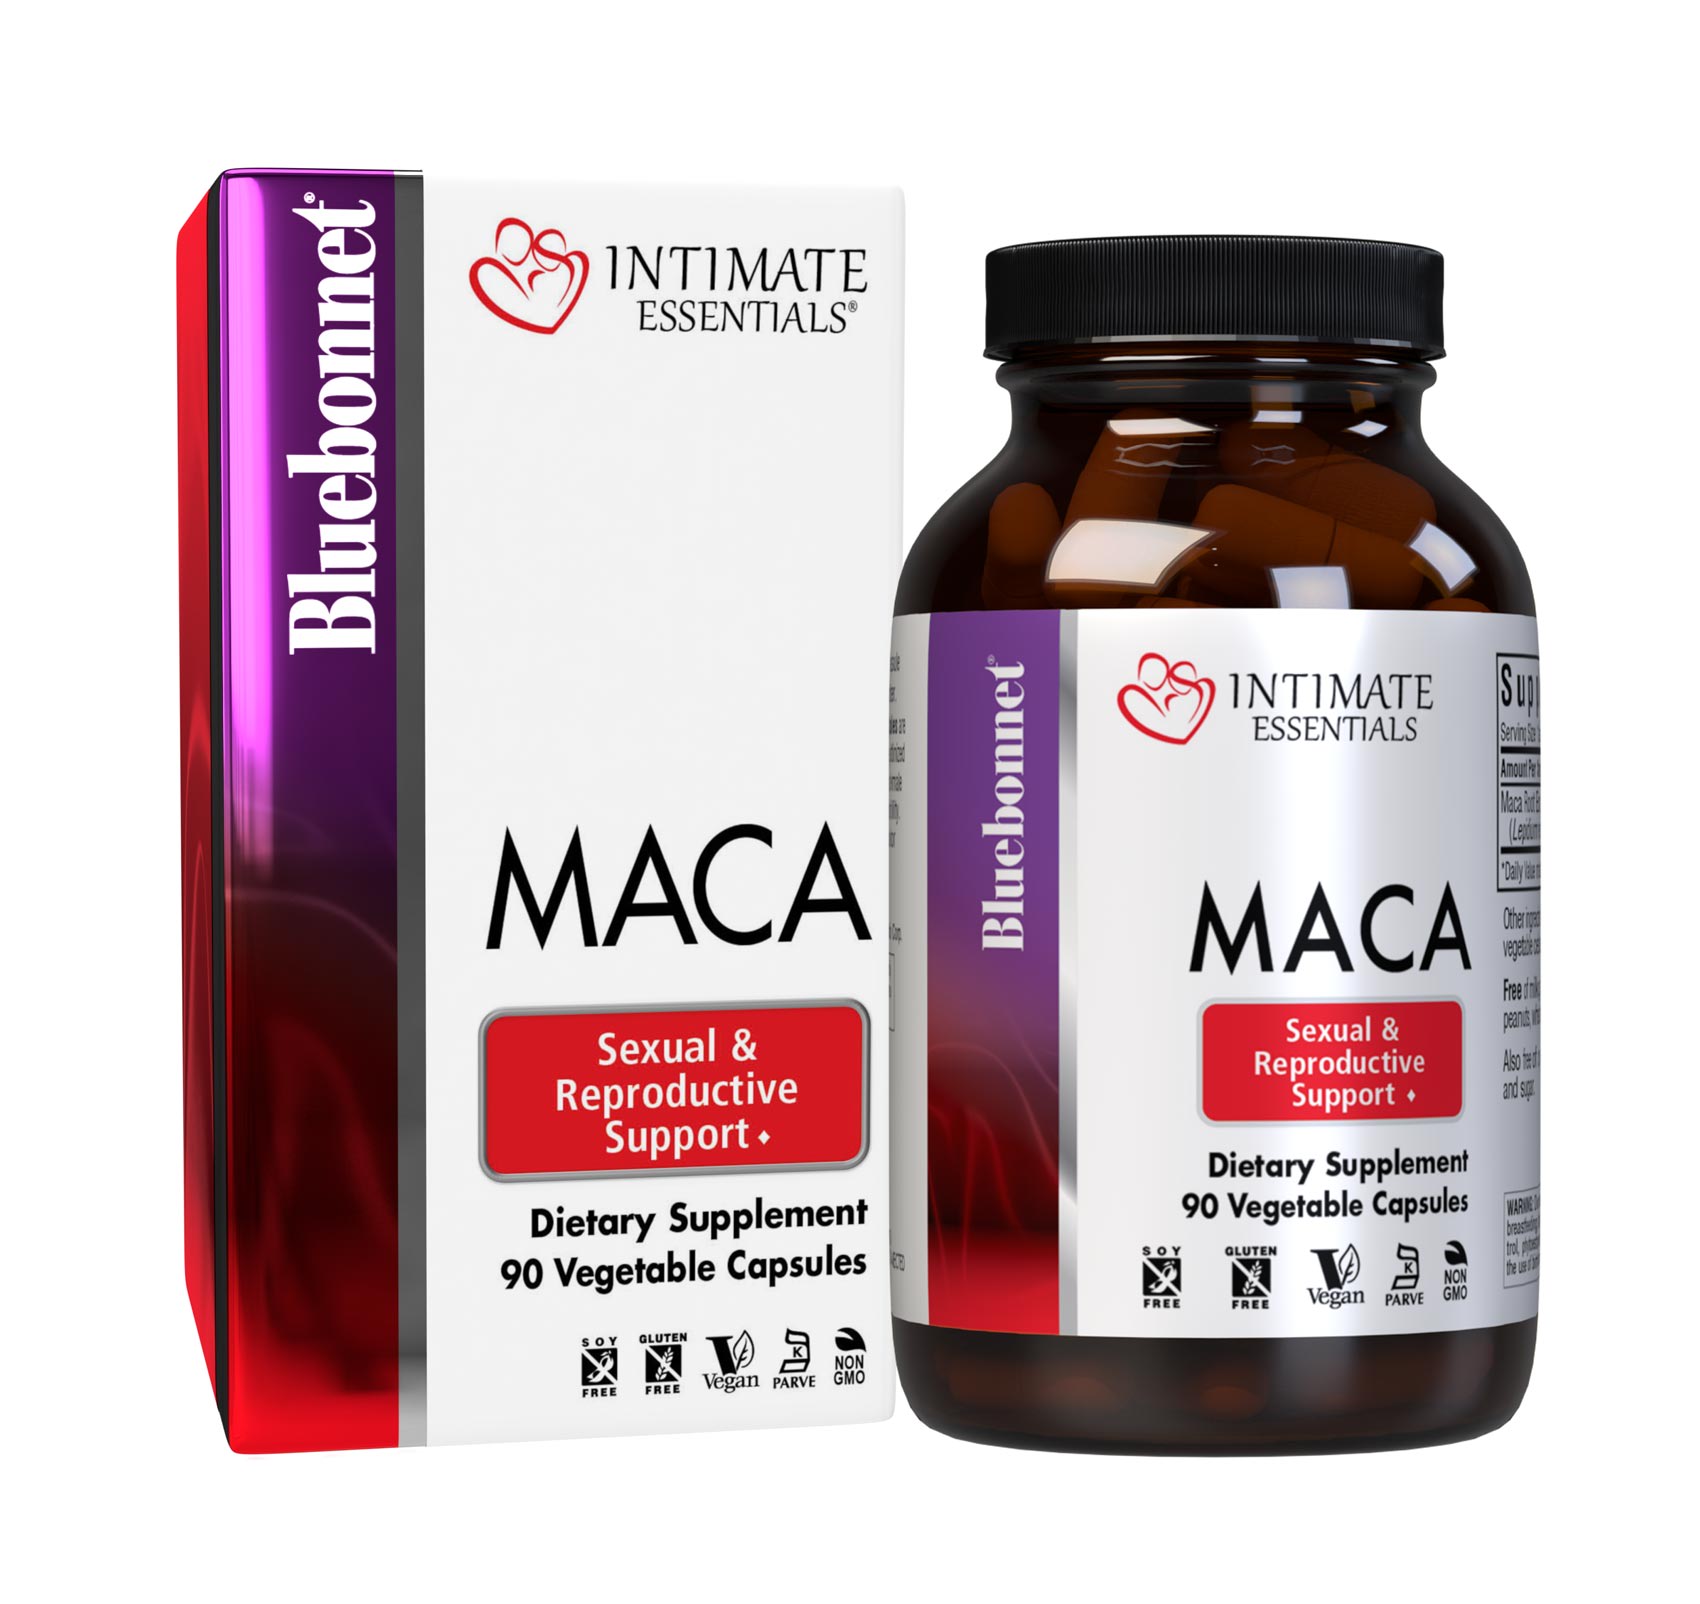 Bluebonnet’s Intimate Essentials Maca 90 pill count bottle comes in box. #size_90 count